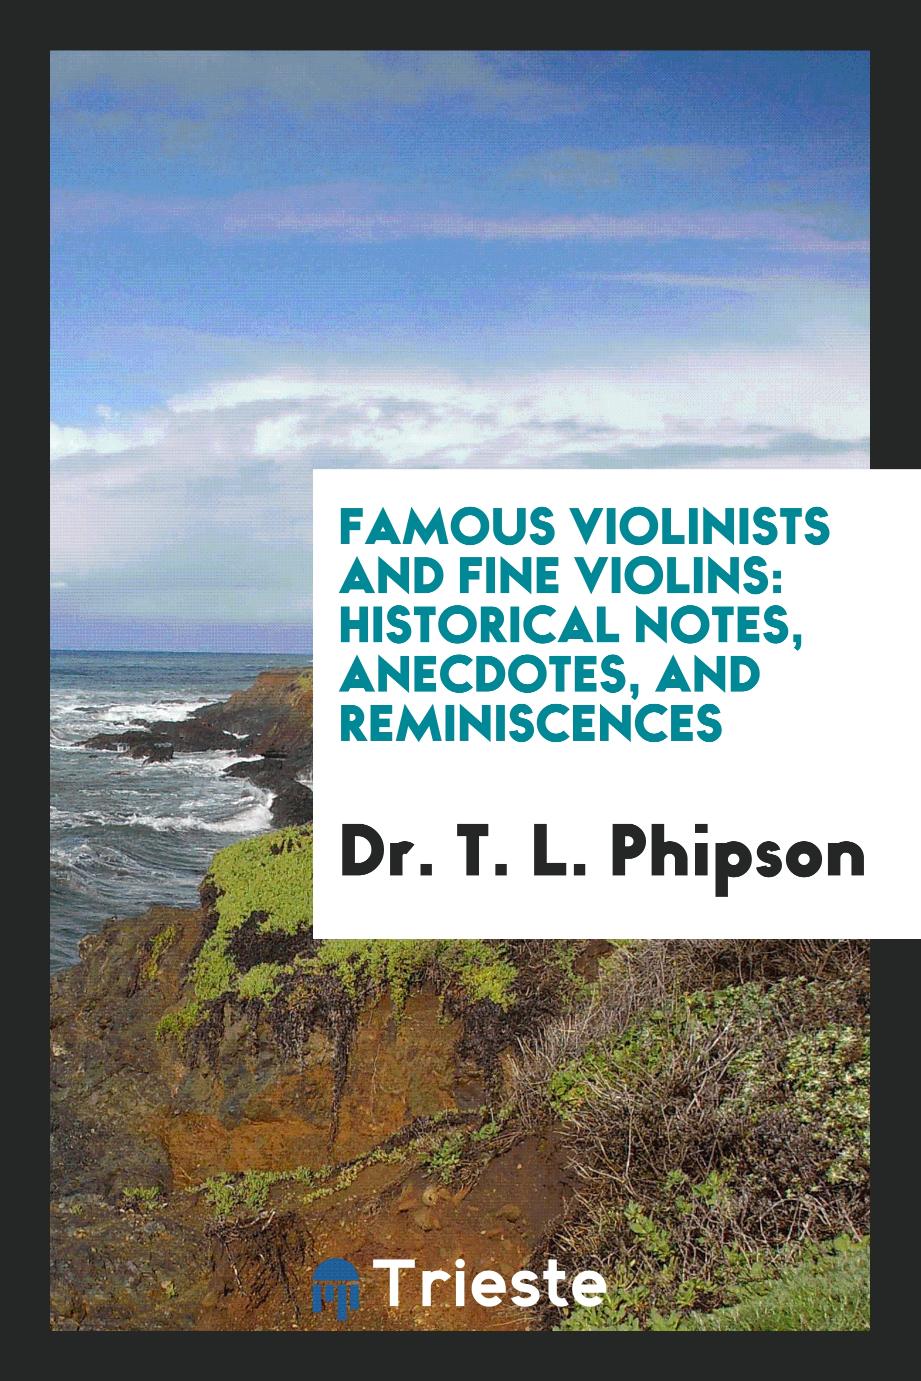 Famous violinists and fine violins: historical notes, anecdotes, and reminiscences